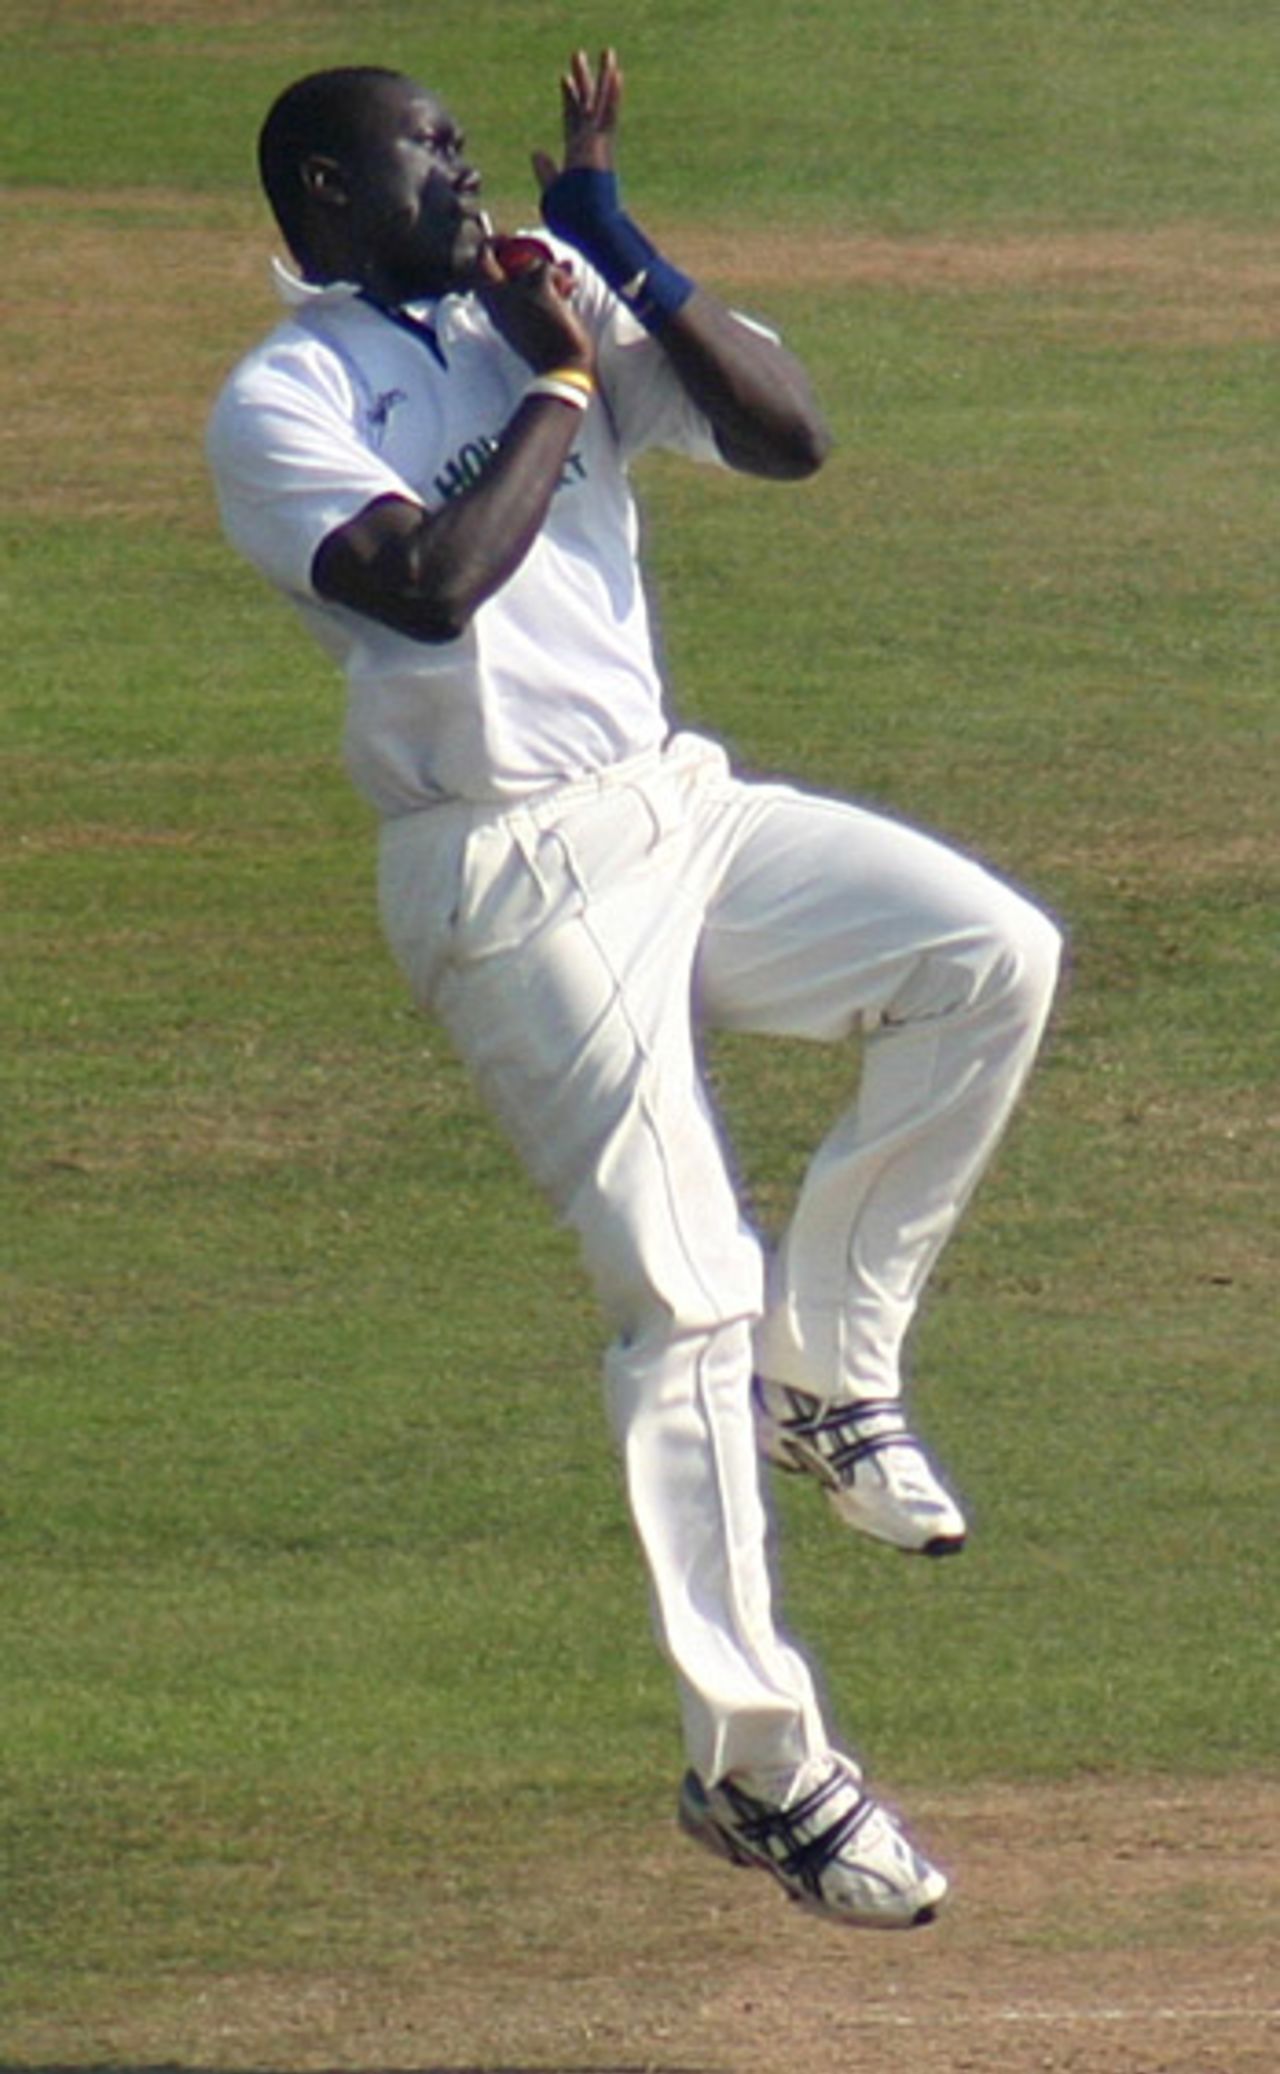 Robbie Joseph poised to unleash a delivery, Sussex v Kent, Hove, September 22, 2005